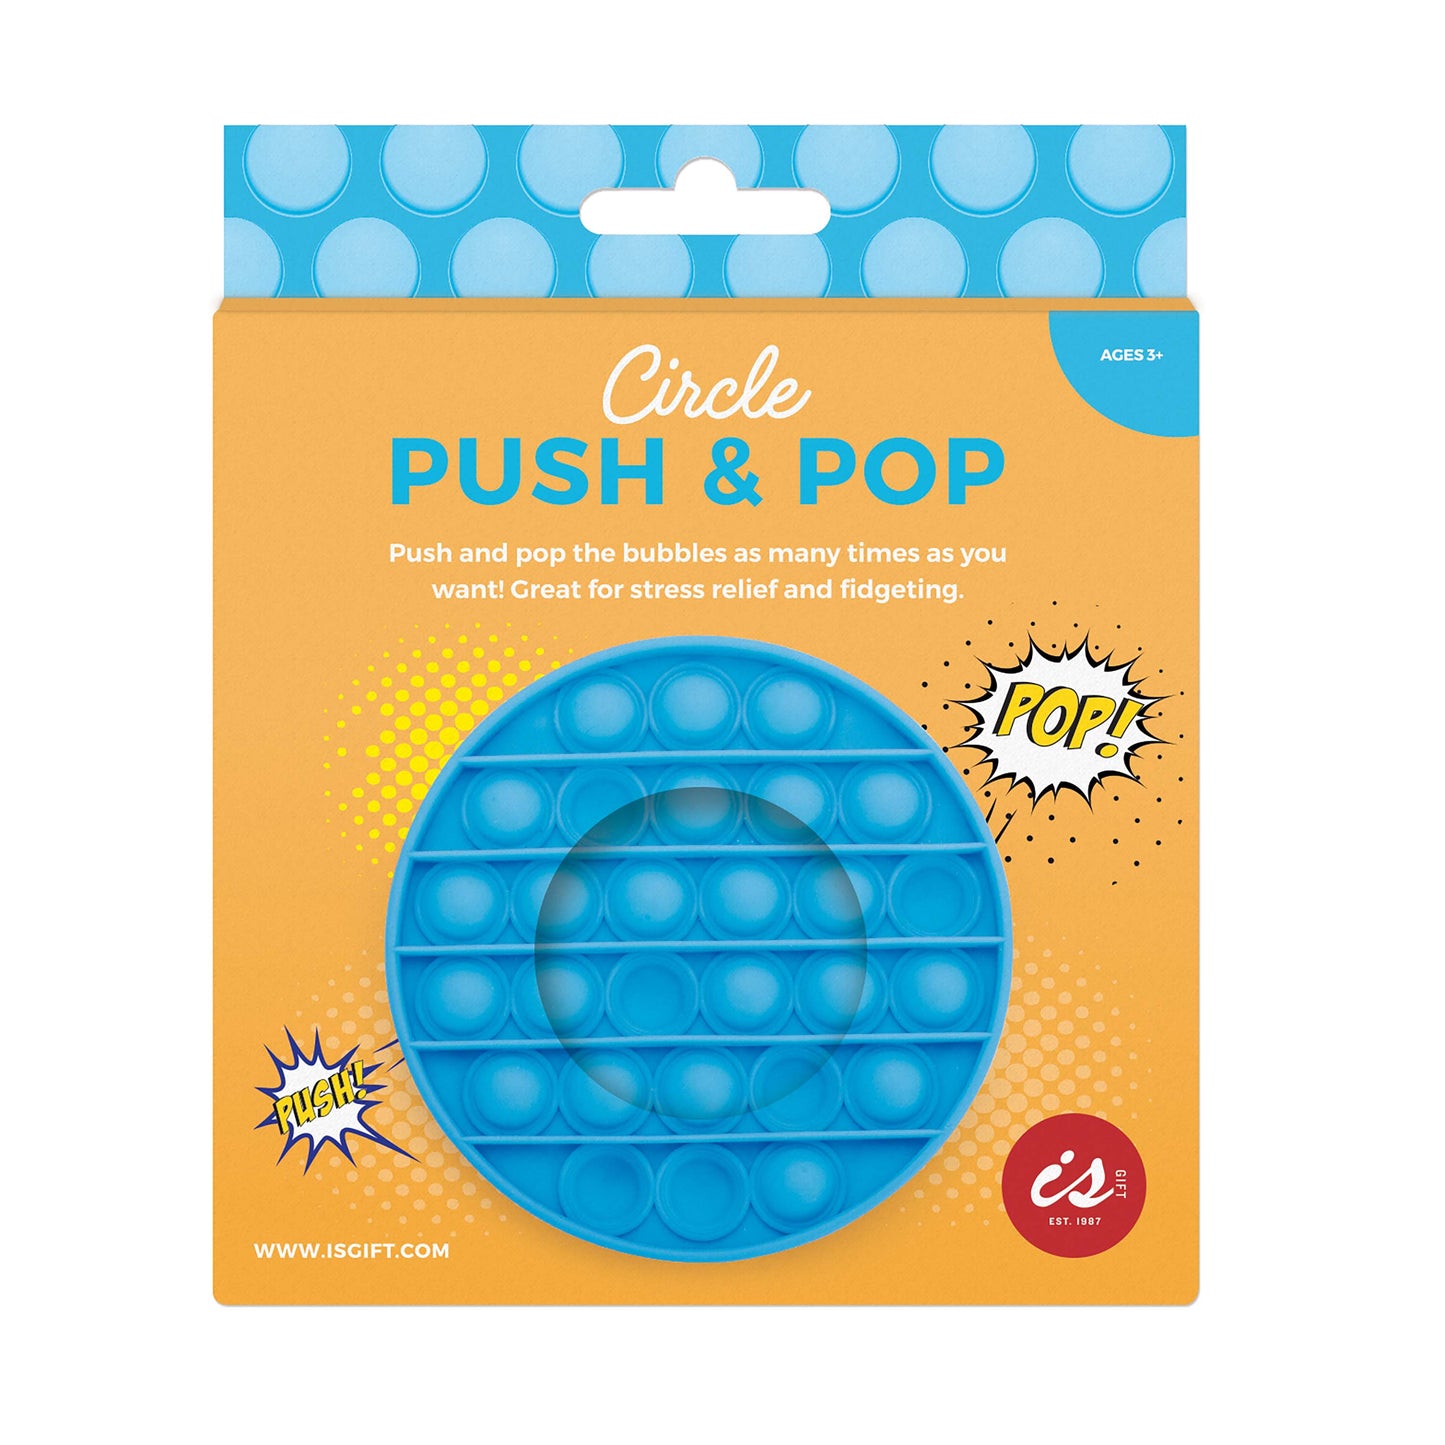 Push and Pop - Shapes